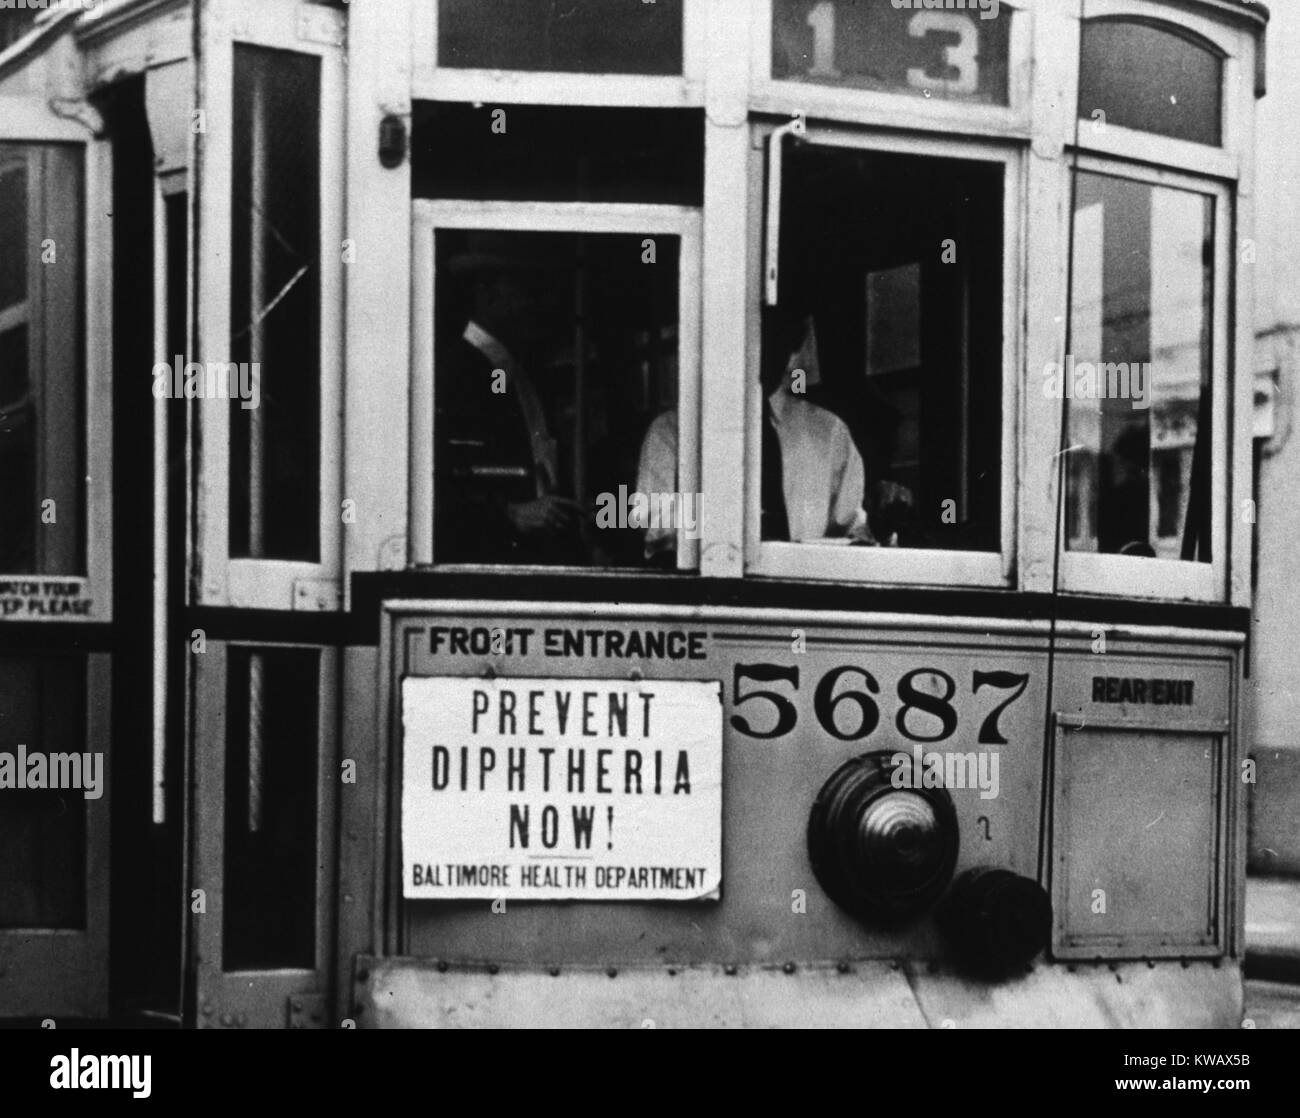 Close up of a sign on a trolley about preventing diphtheria, Baltimore, Maryland, 1950. Courtesy National Library of Medicine. Stock Photo